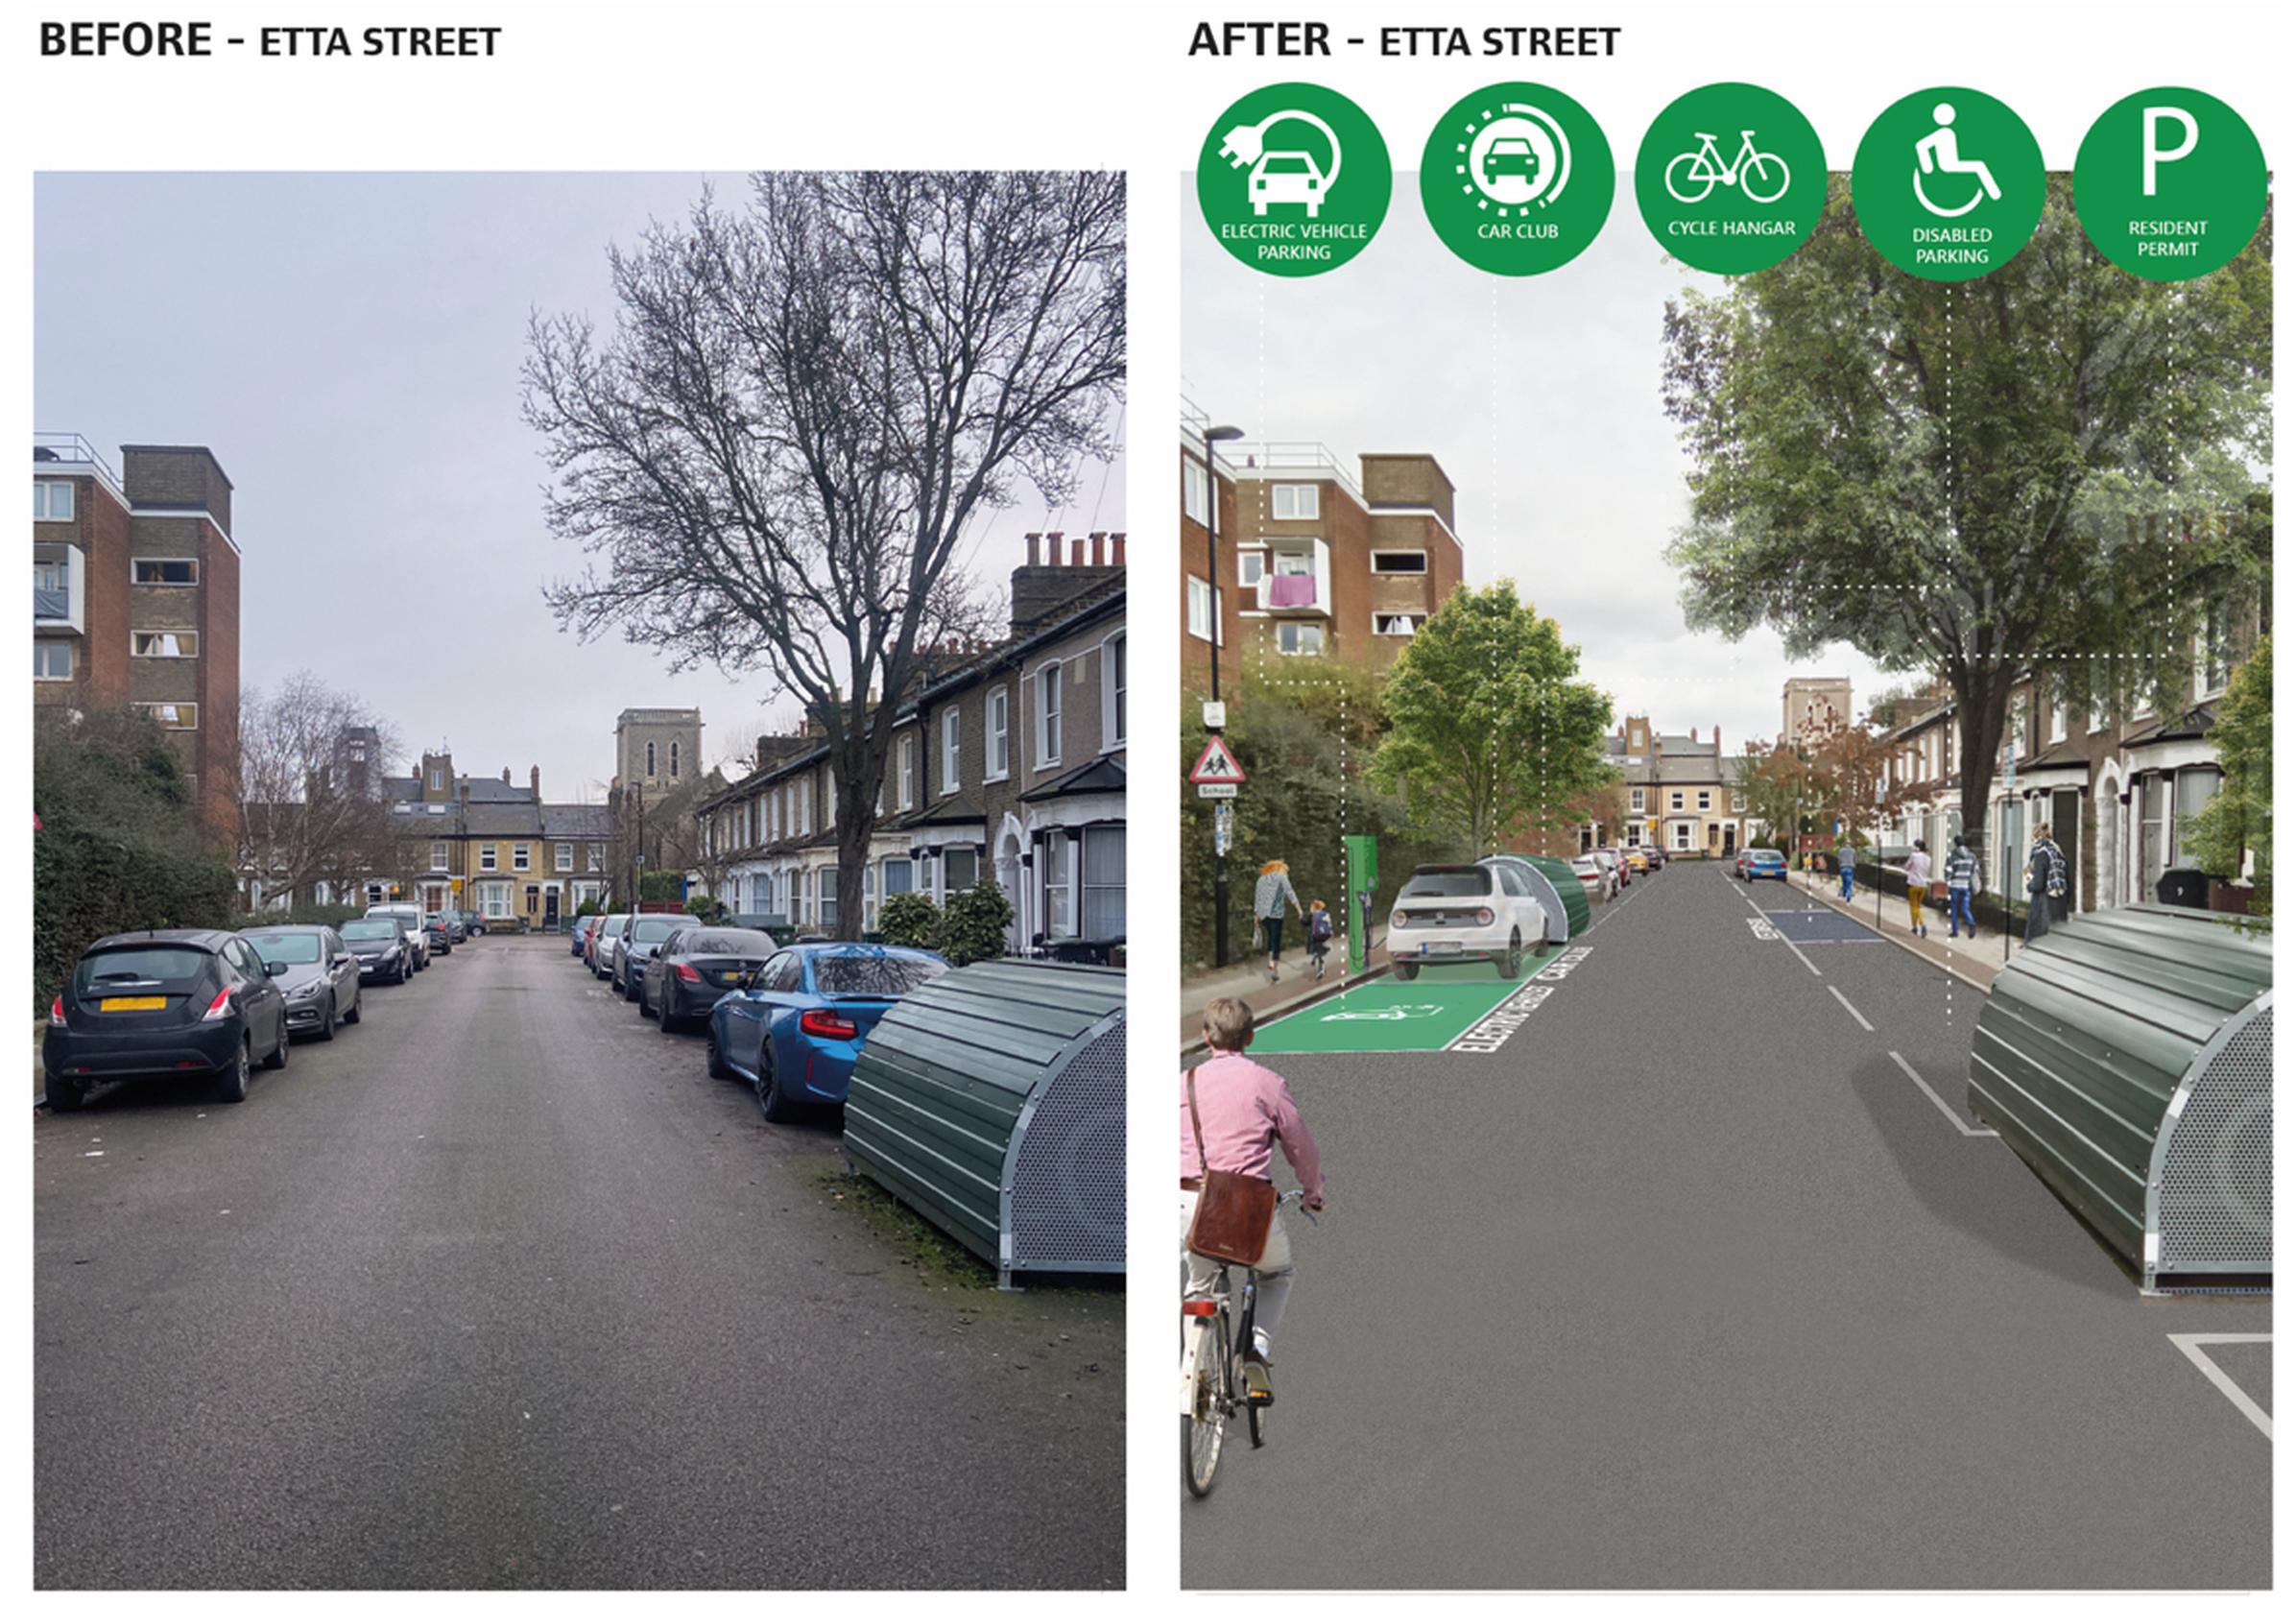 Lewisham Council`s proposed changes to Etta Street, Deptford, as part of phase one of the Sustainable Streets programme